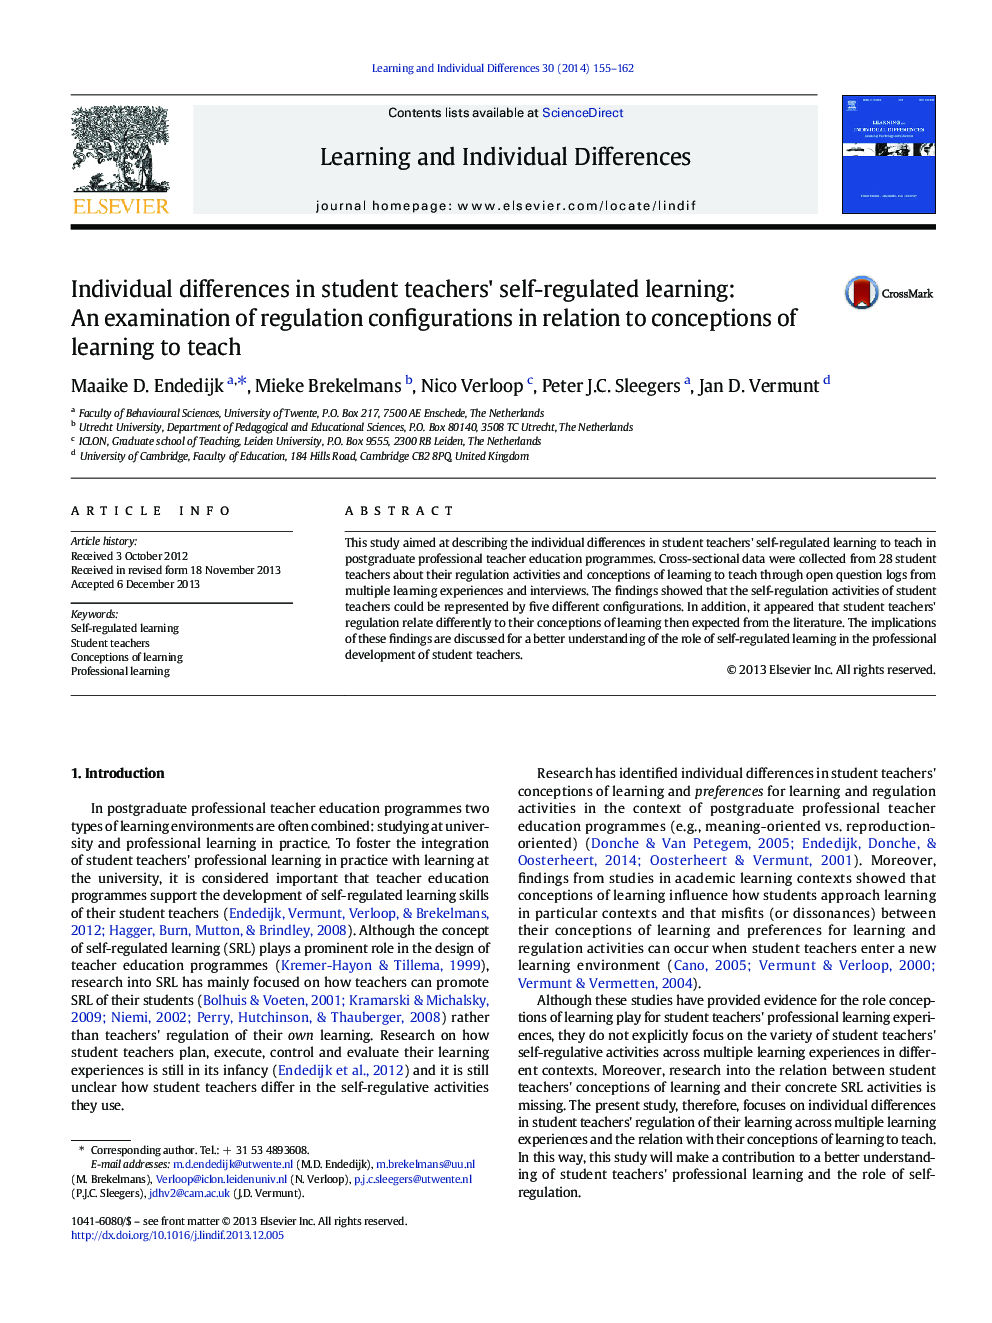 Individual differences in student teachers' self-regulated learning: An examination of regulation configurations in relation to conceptions of learning to teach